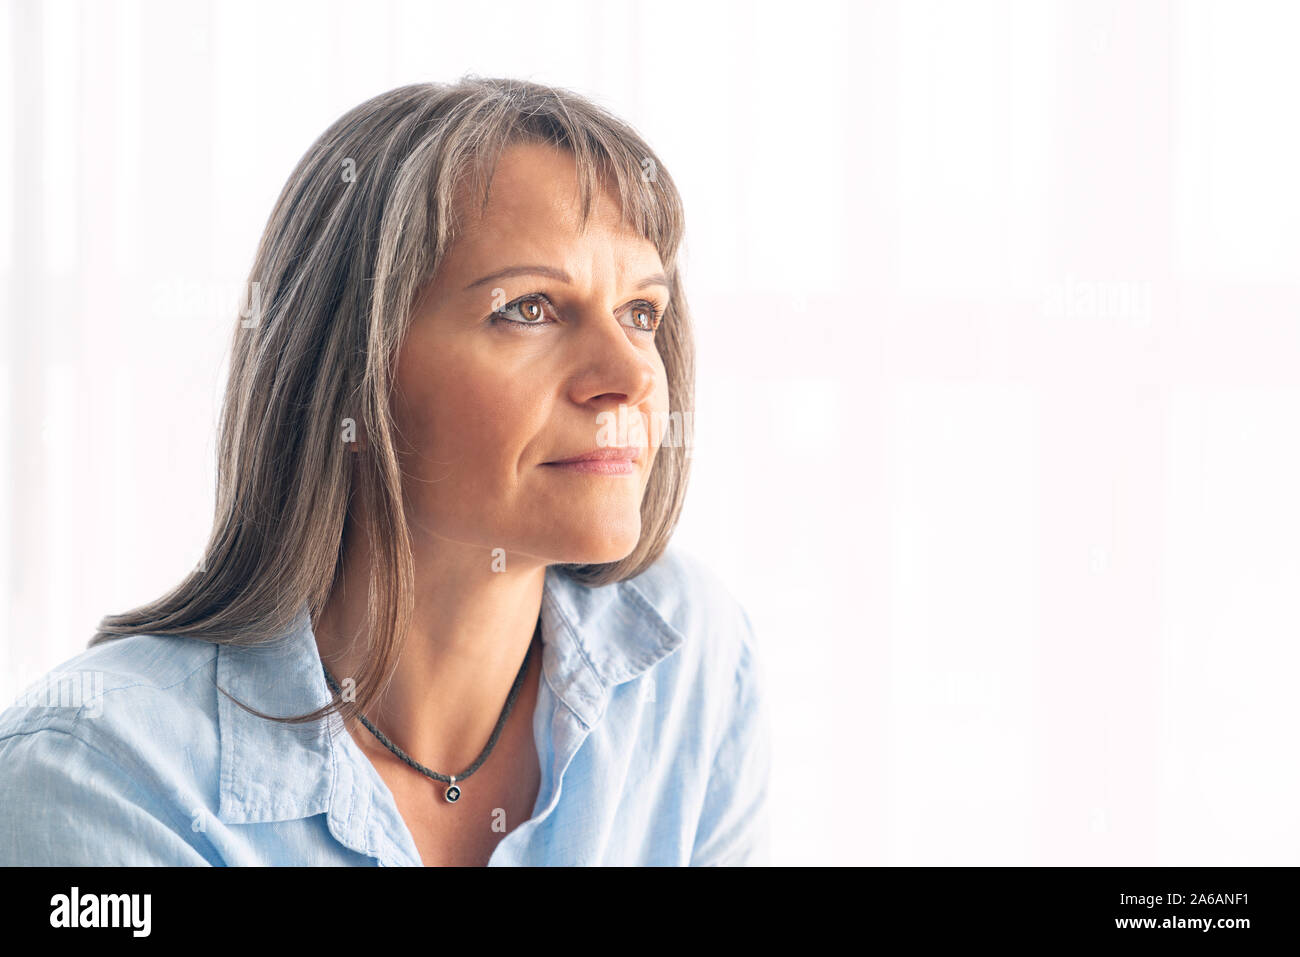 portrait of a middle aged woman with grey hair Stock Photo